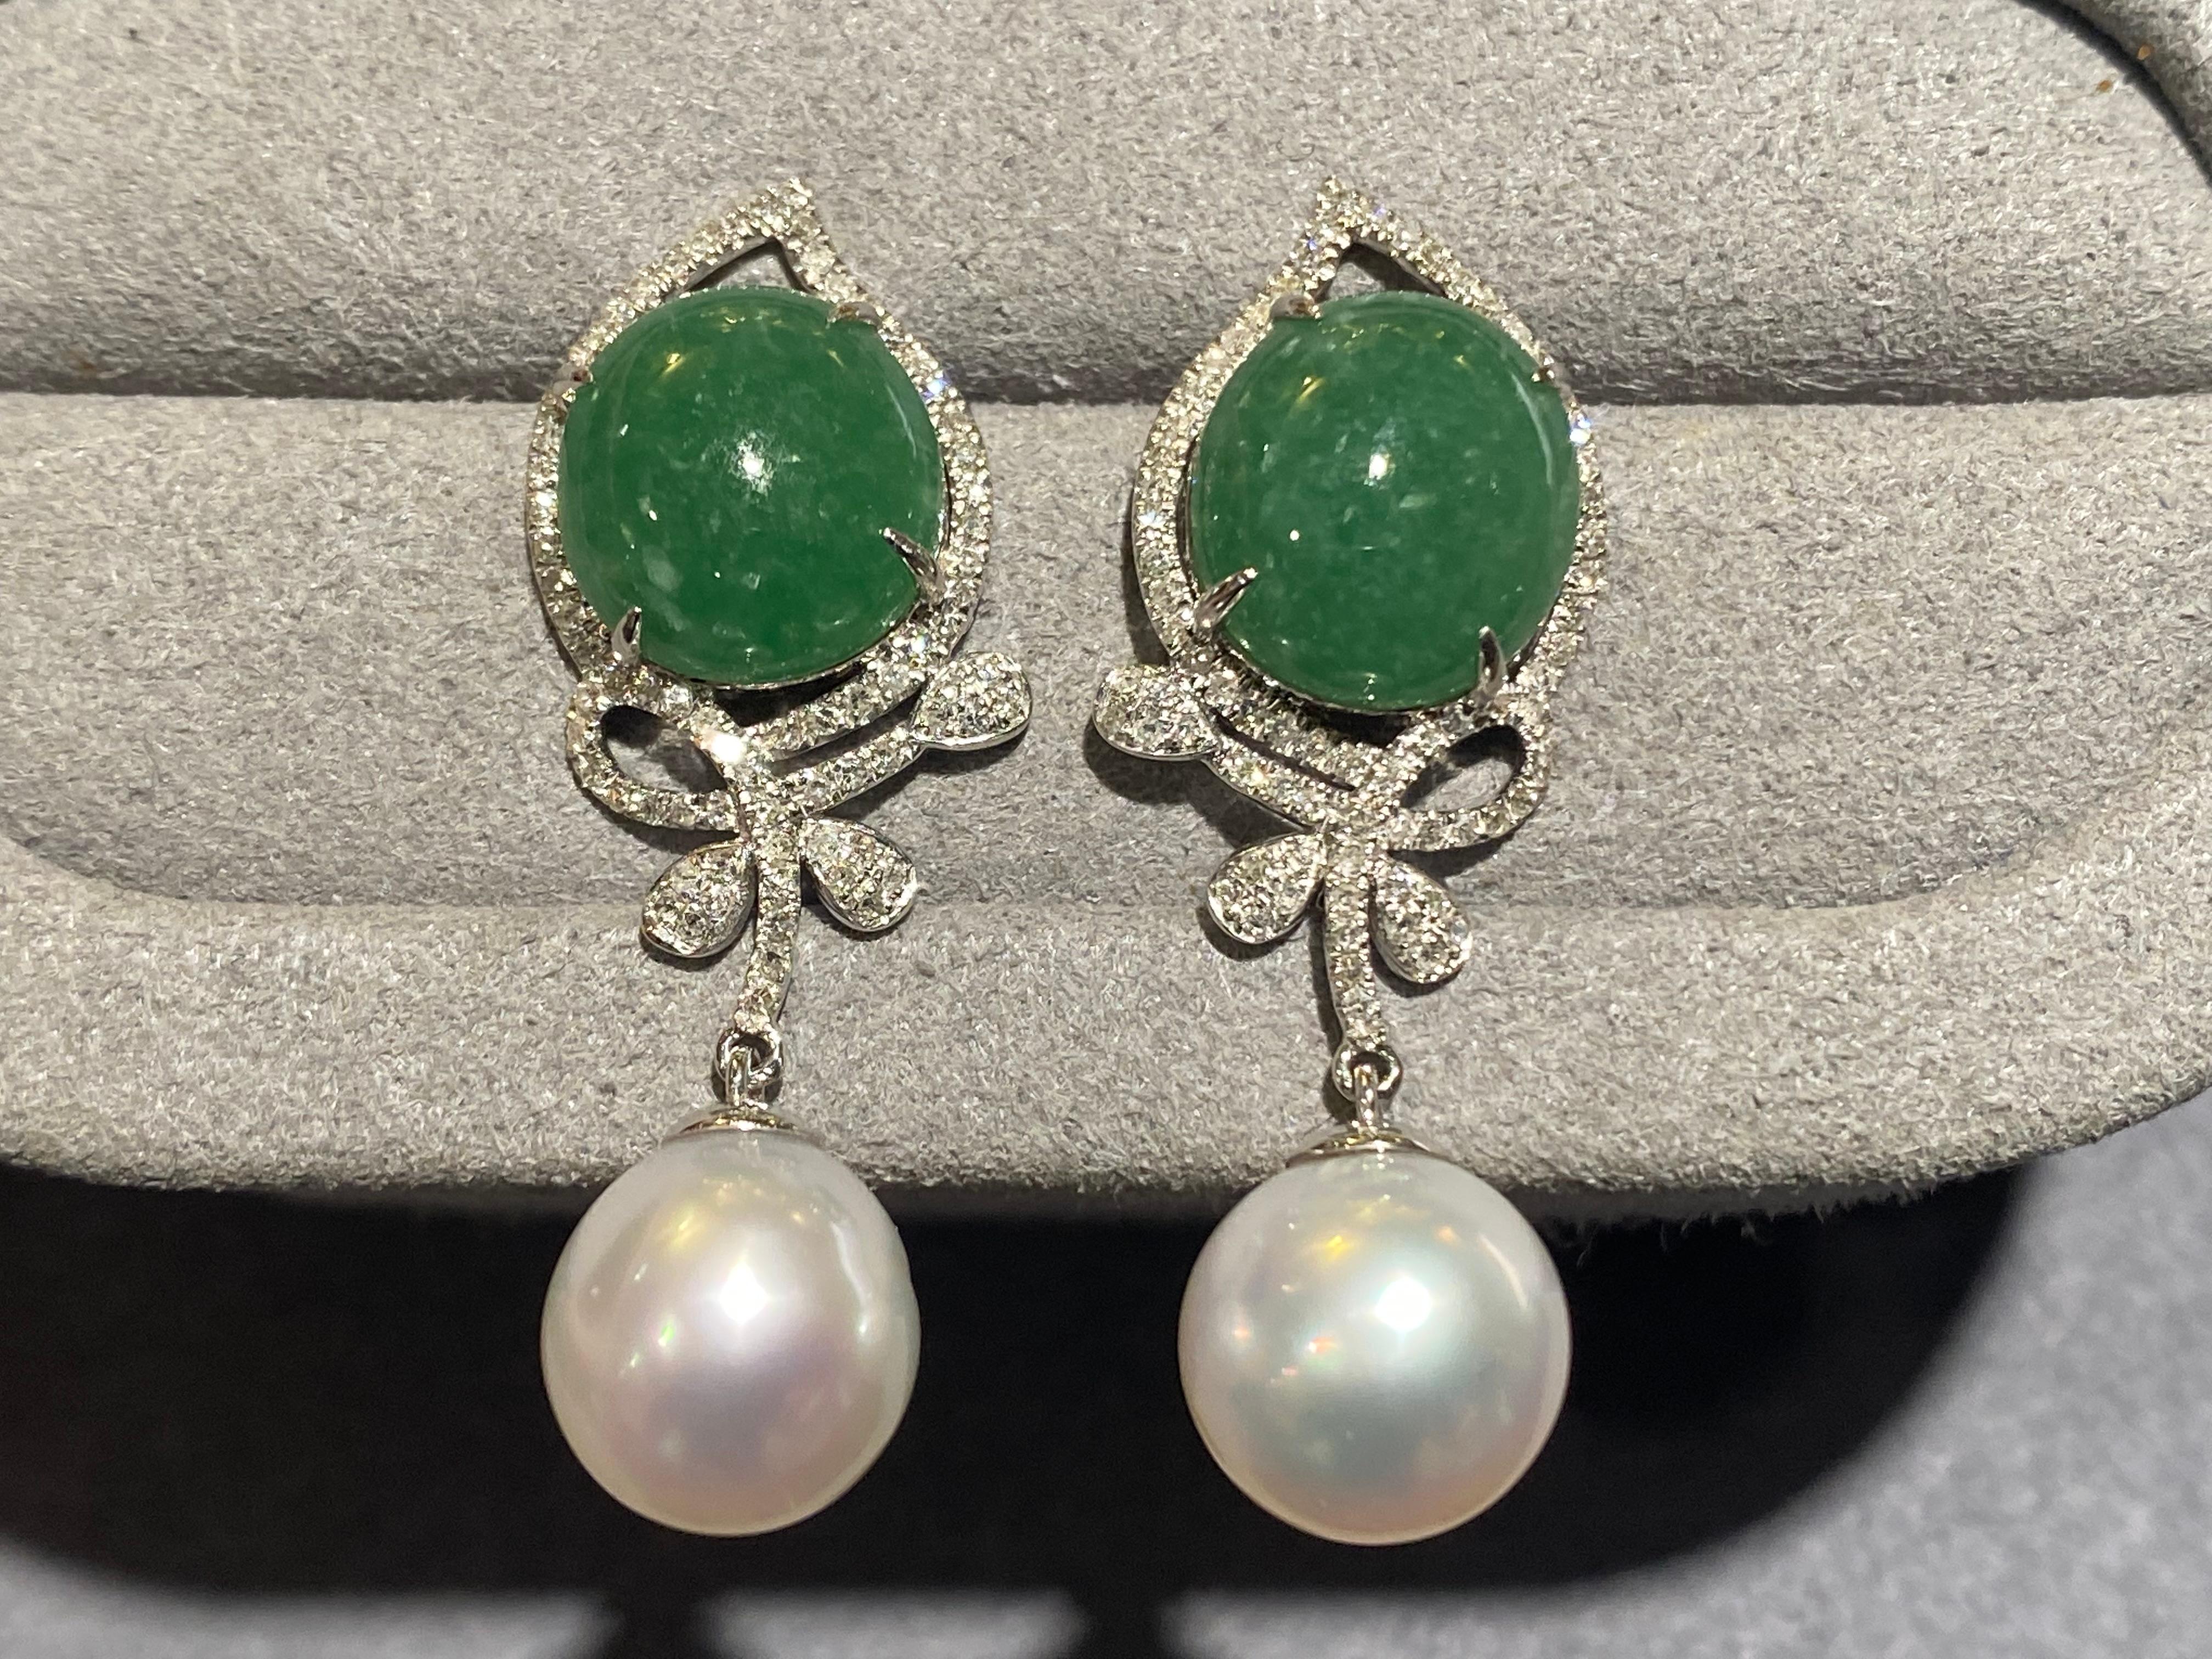 A Pair of Type A green jadeite, Australian White South Sea Pearl and Diamond Earrings in 18k White Gold. The type A green jadeite is set within a rain-drop shape diamond pave and is secured by 4 claws. The butterfly-like ribbon pattern is set with